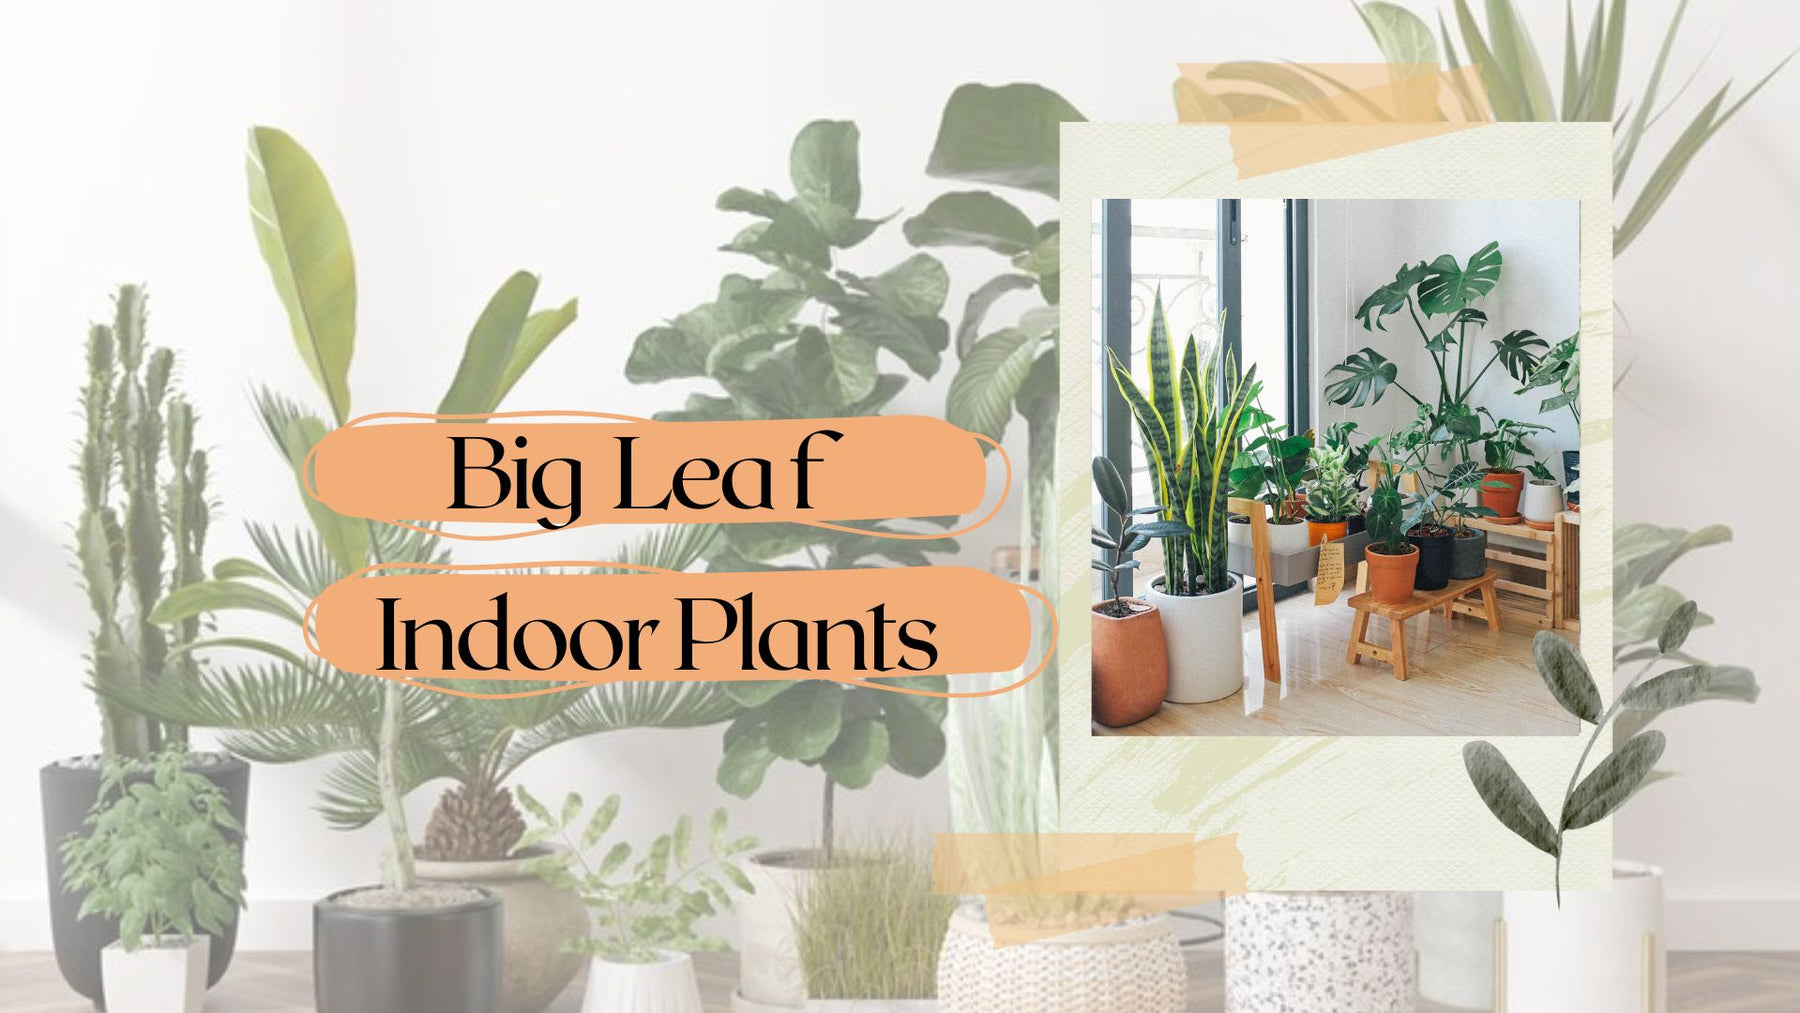 20 Statement-Making Houseplants with Huge Leaves